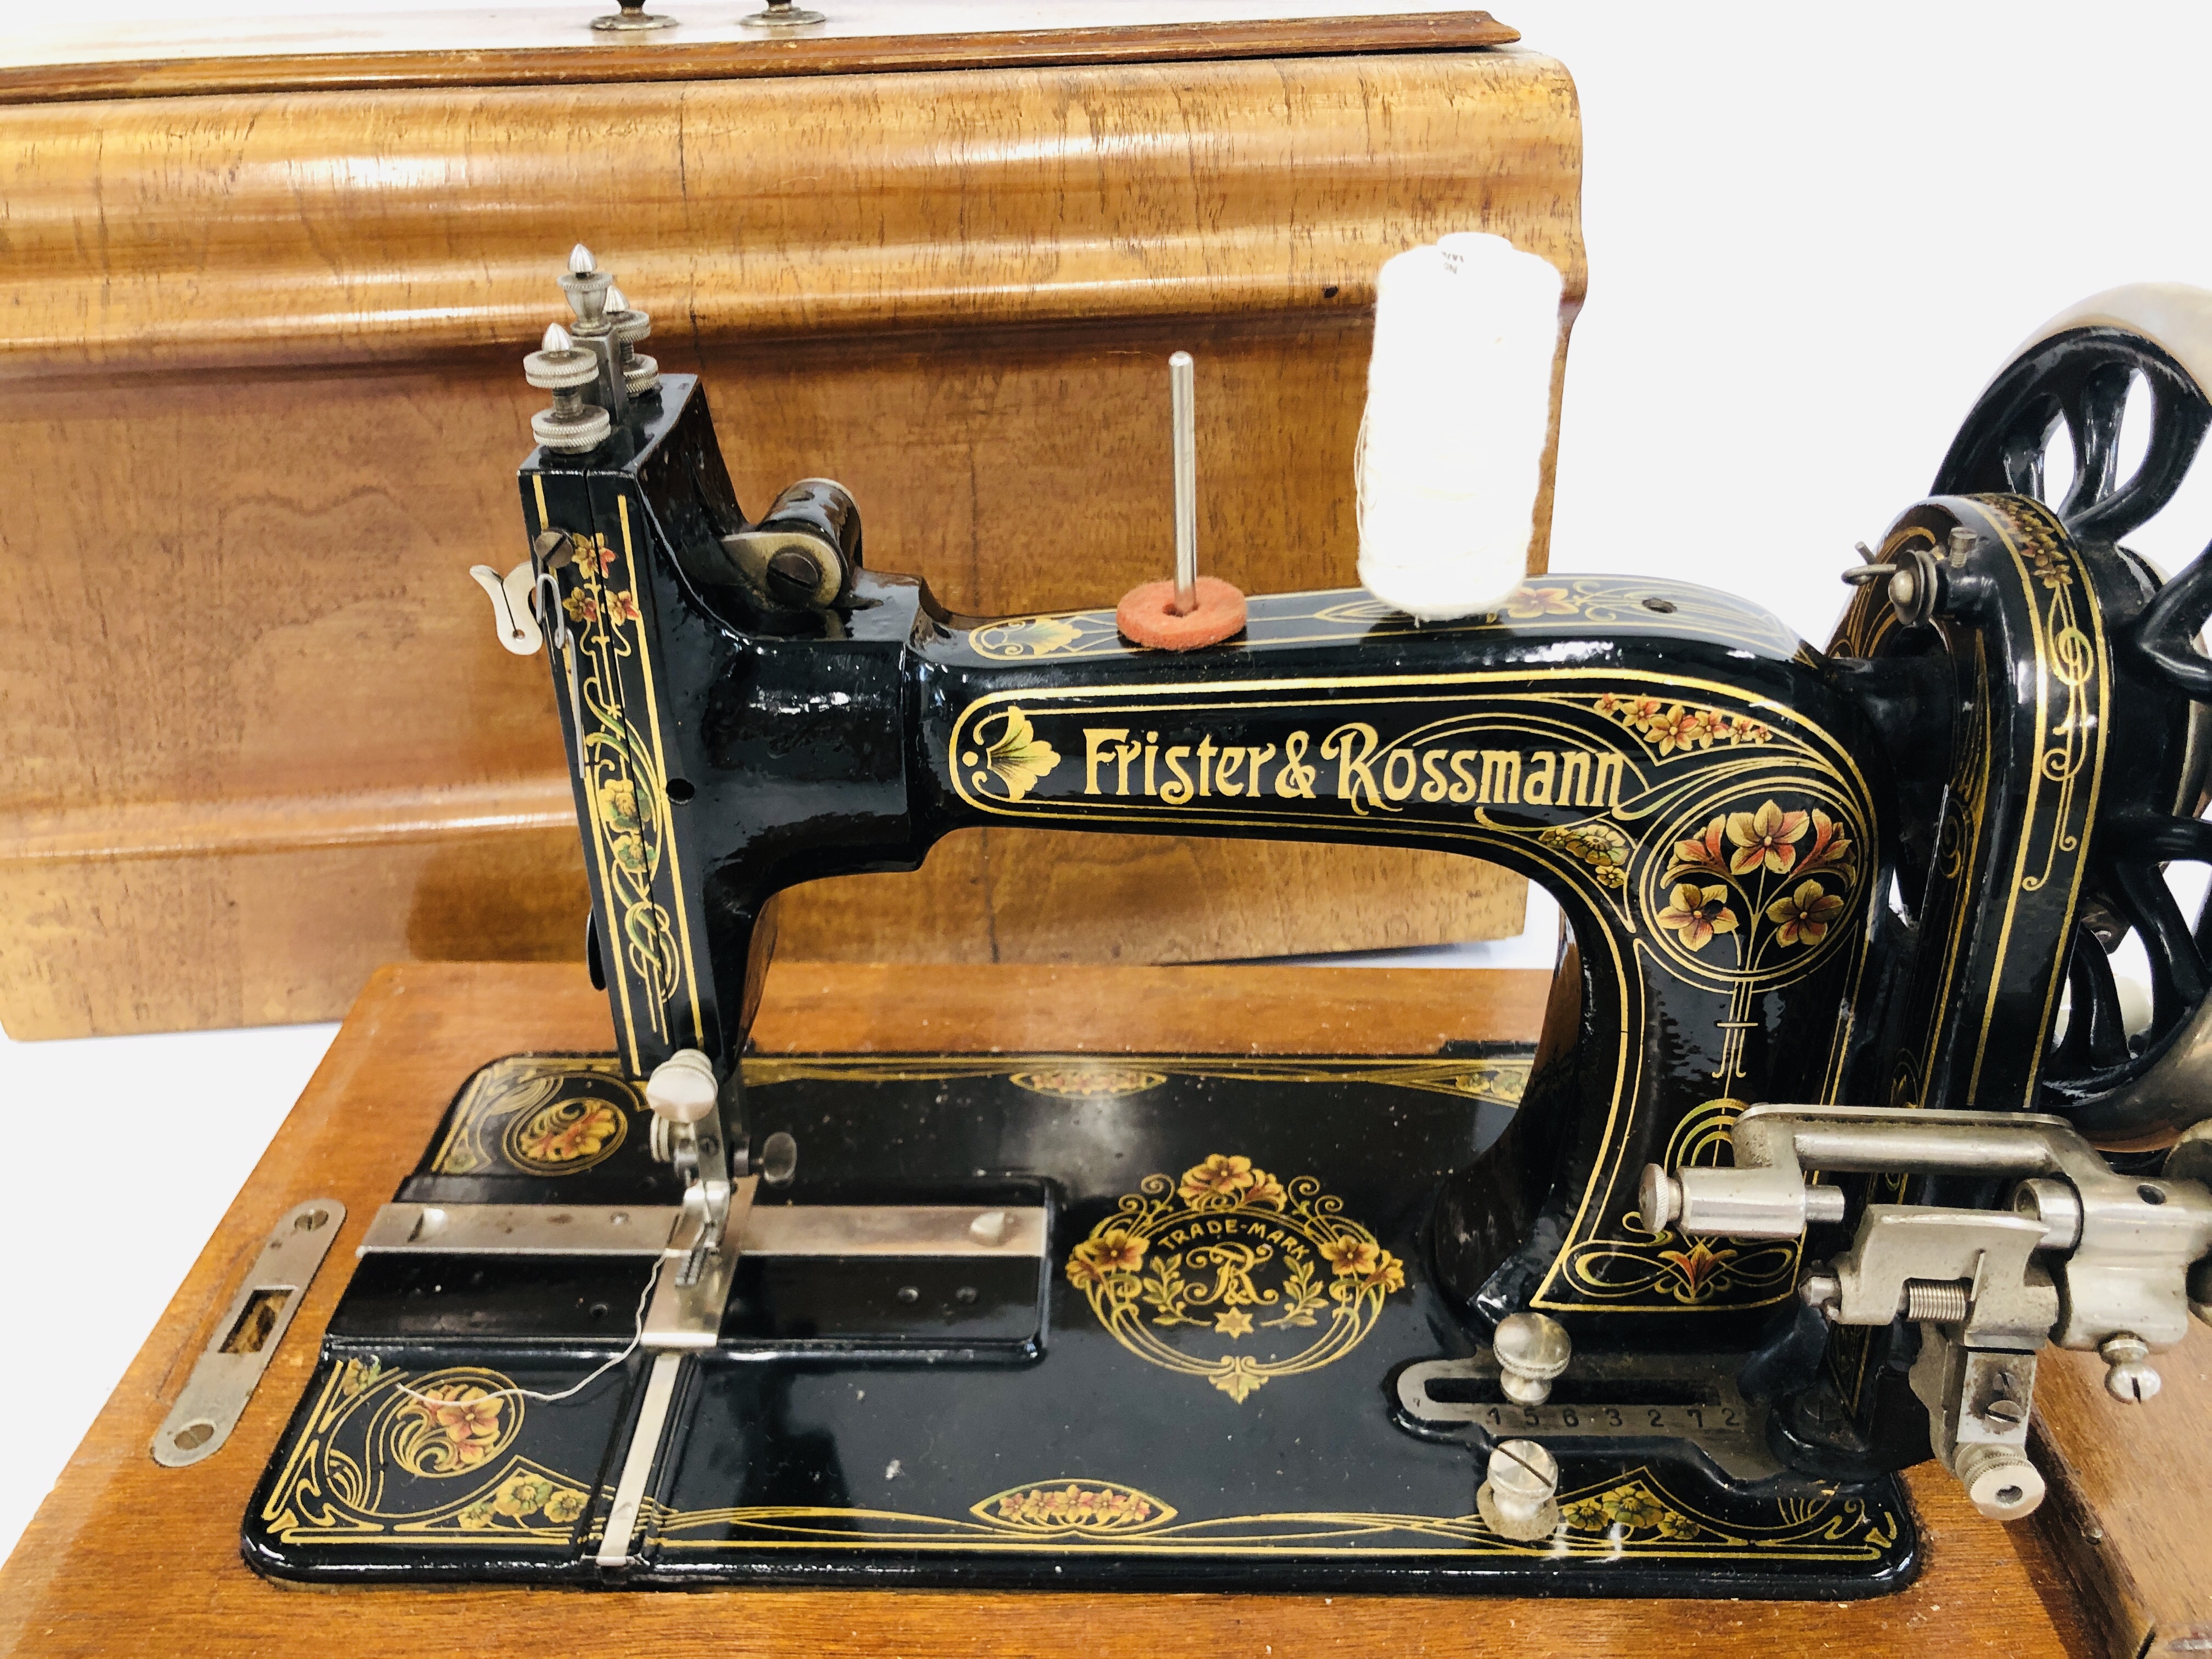 A VINTAGE GILT DECORATED FRISTER & ROSSMANN SEWING MACHINE COMPLETE WITH COVER - SOLD AS SEEN. - Image 2 of 6